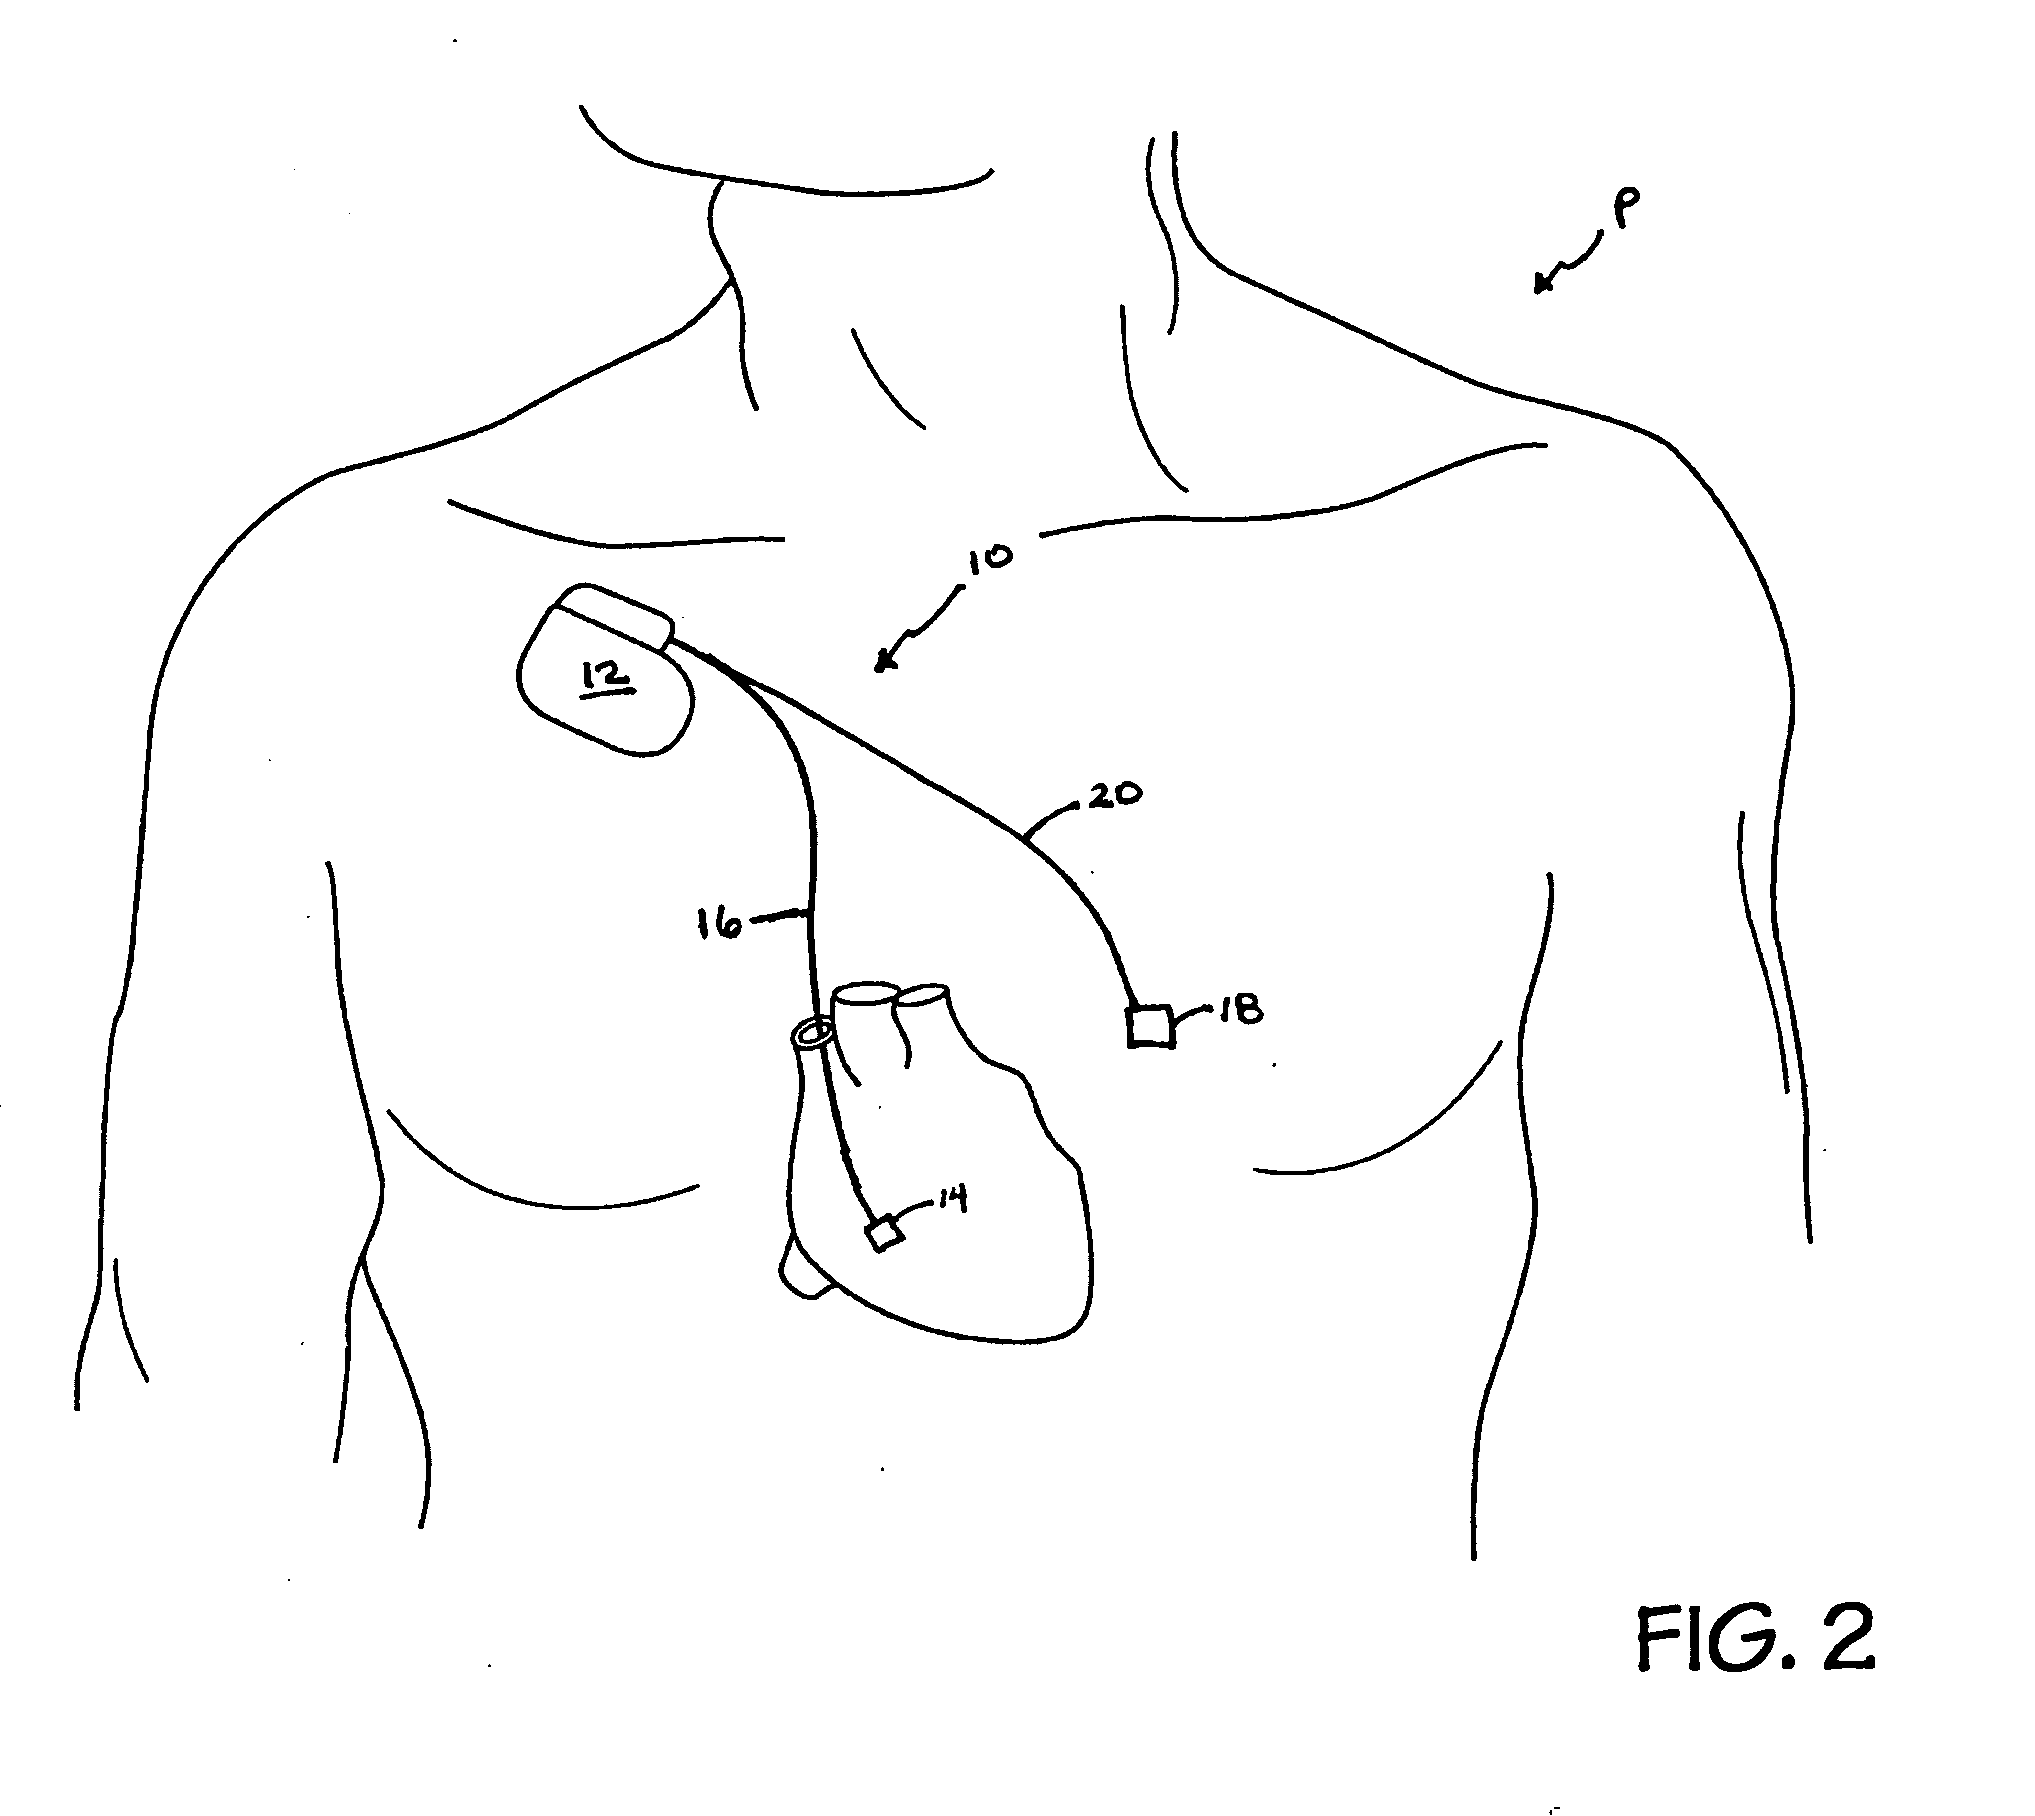 System and method for regulating blood pressure and electrolyte balance